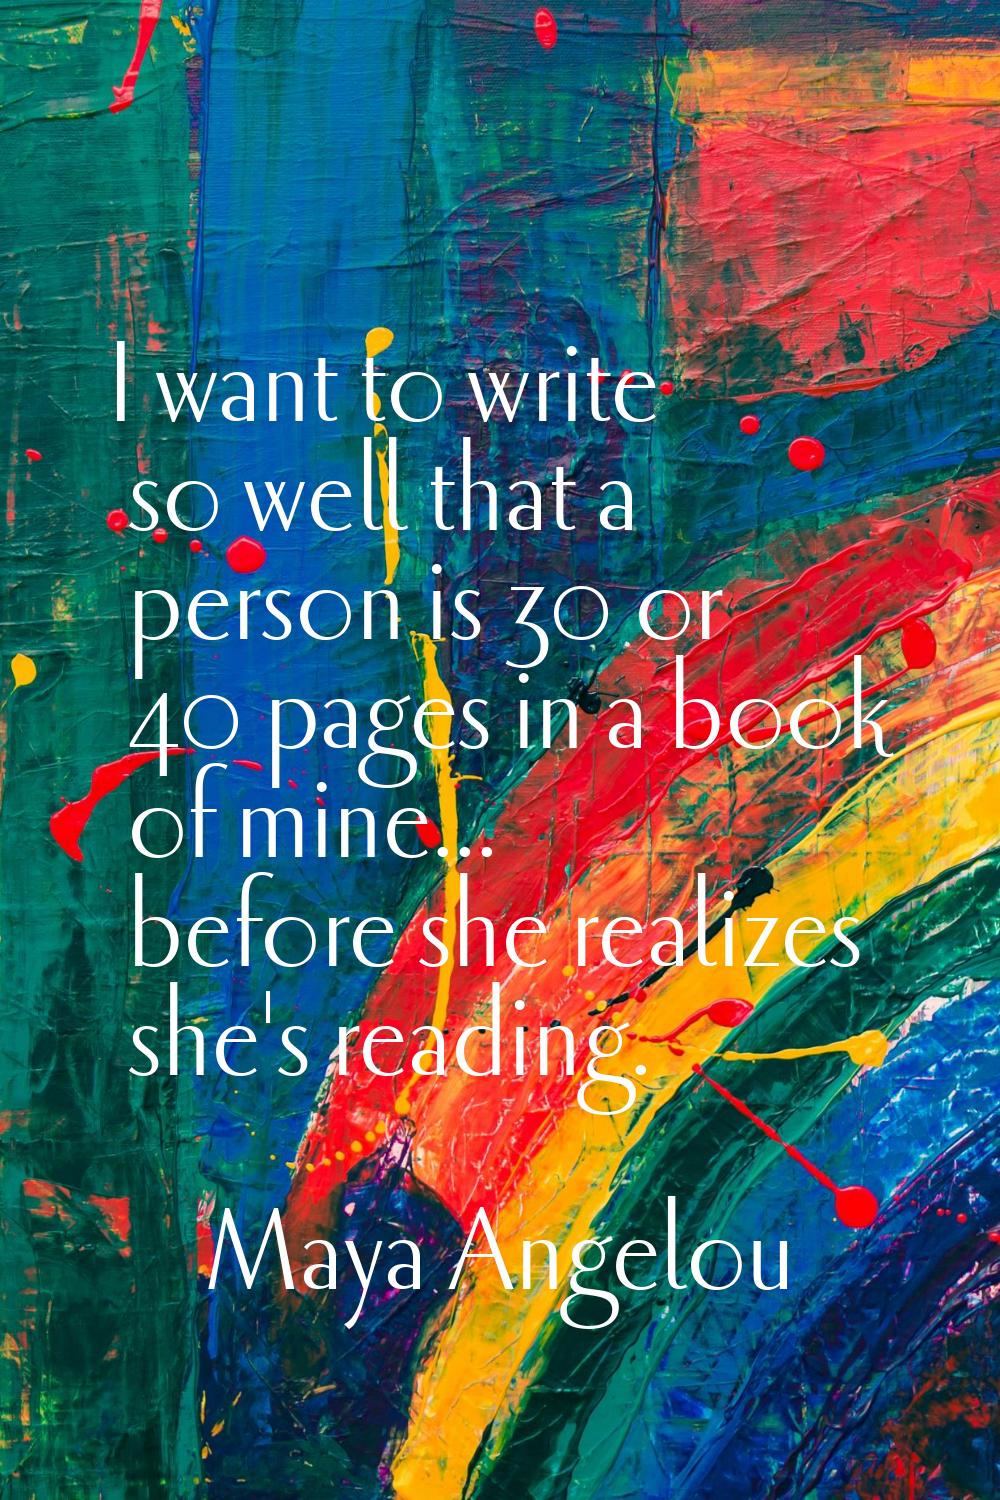 I want to write so well that a person is 30 or 40 pages in a book of mine... before she realizes sh